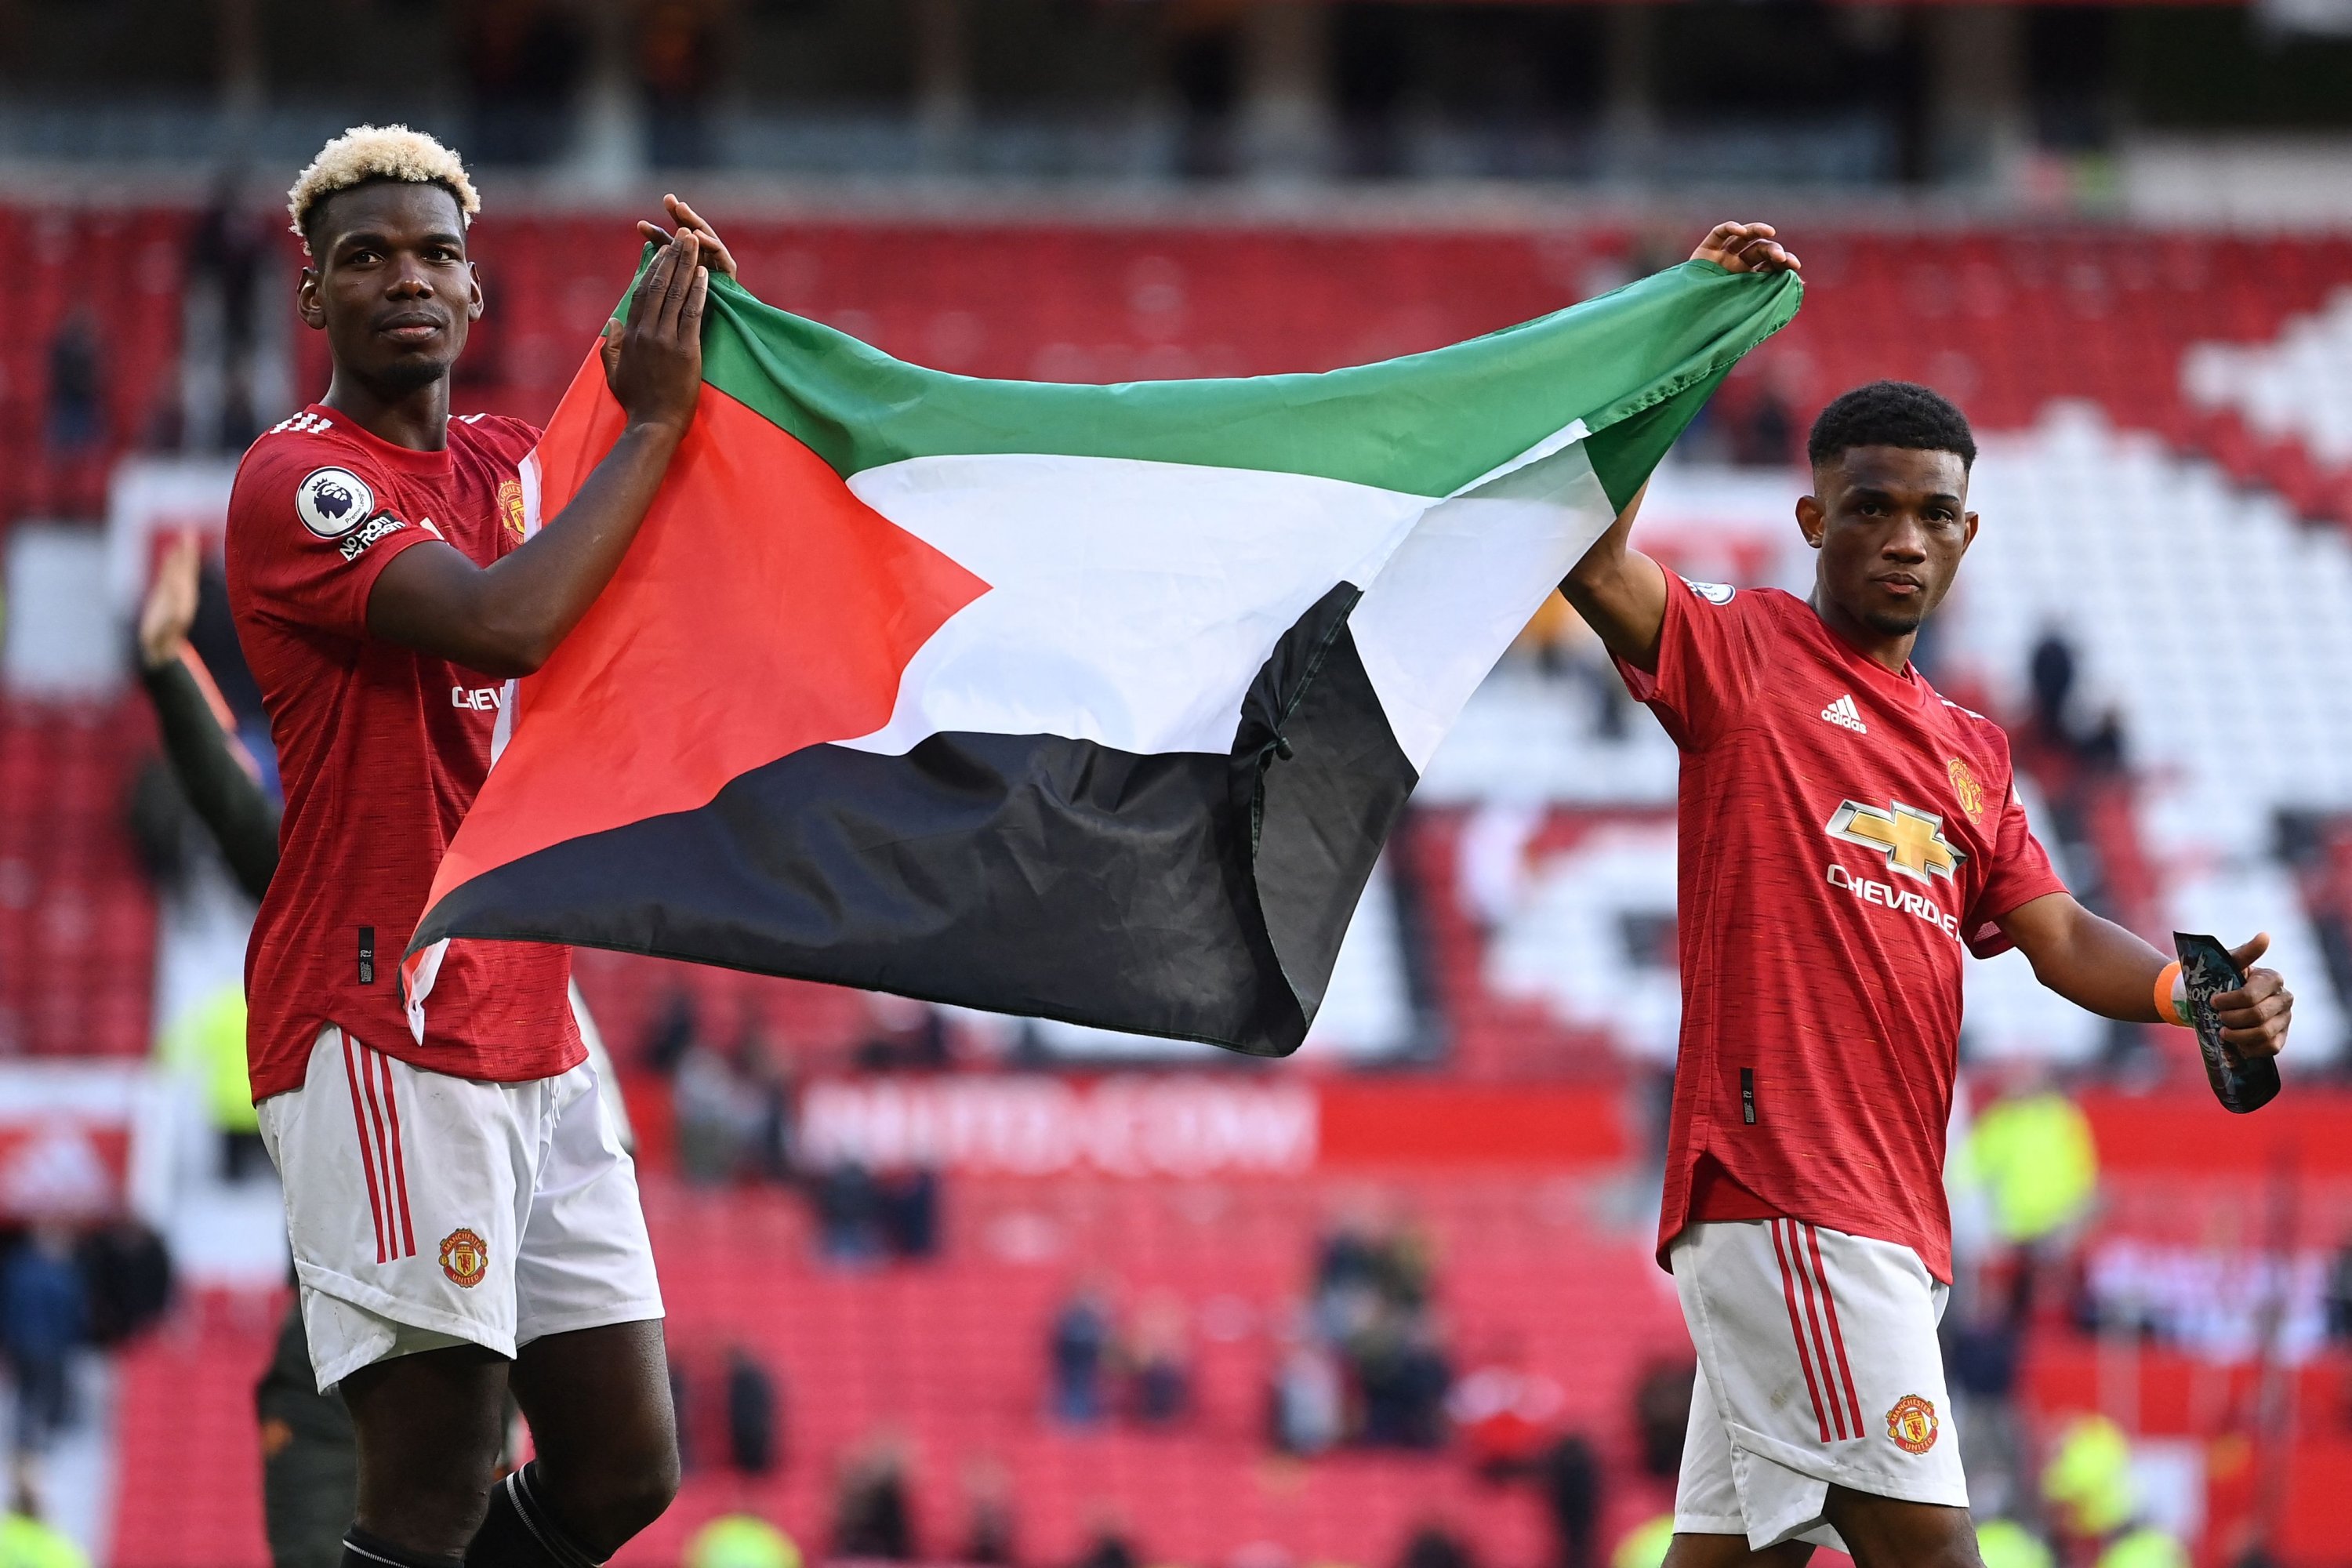 Man Utd's Paul Pogba (L) and Amad Diallo carry a Palestinian flag as they walk around the pitch at the end of a Premier League match against Fulham, Manchester, England, May 18, 2021. (AFP Photo)